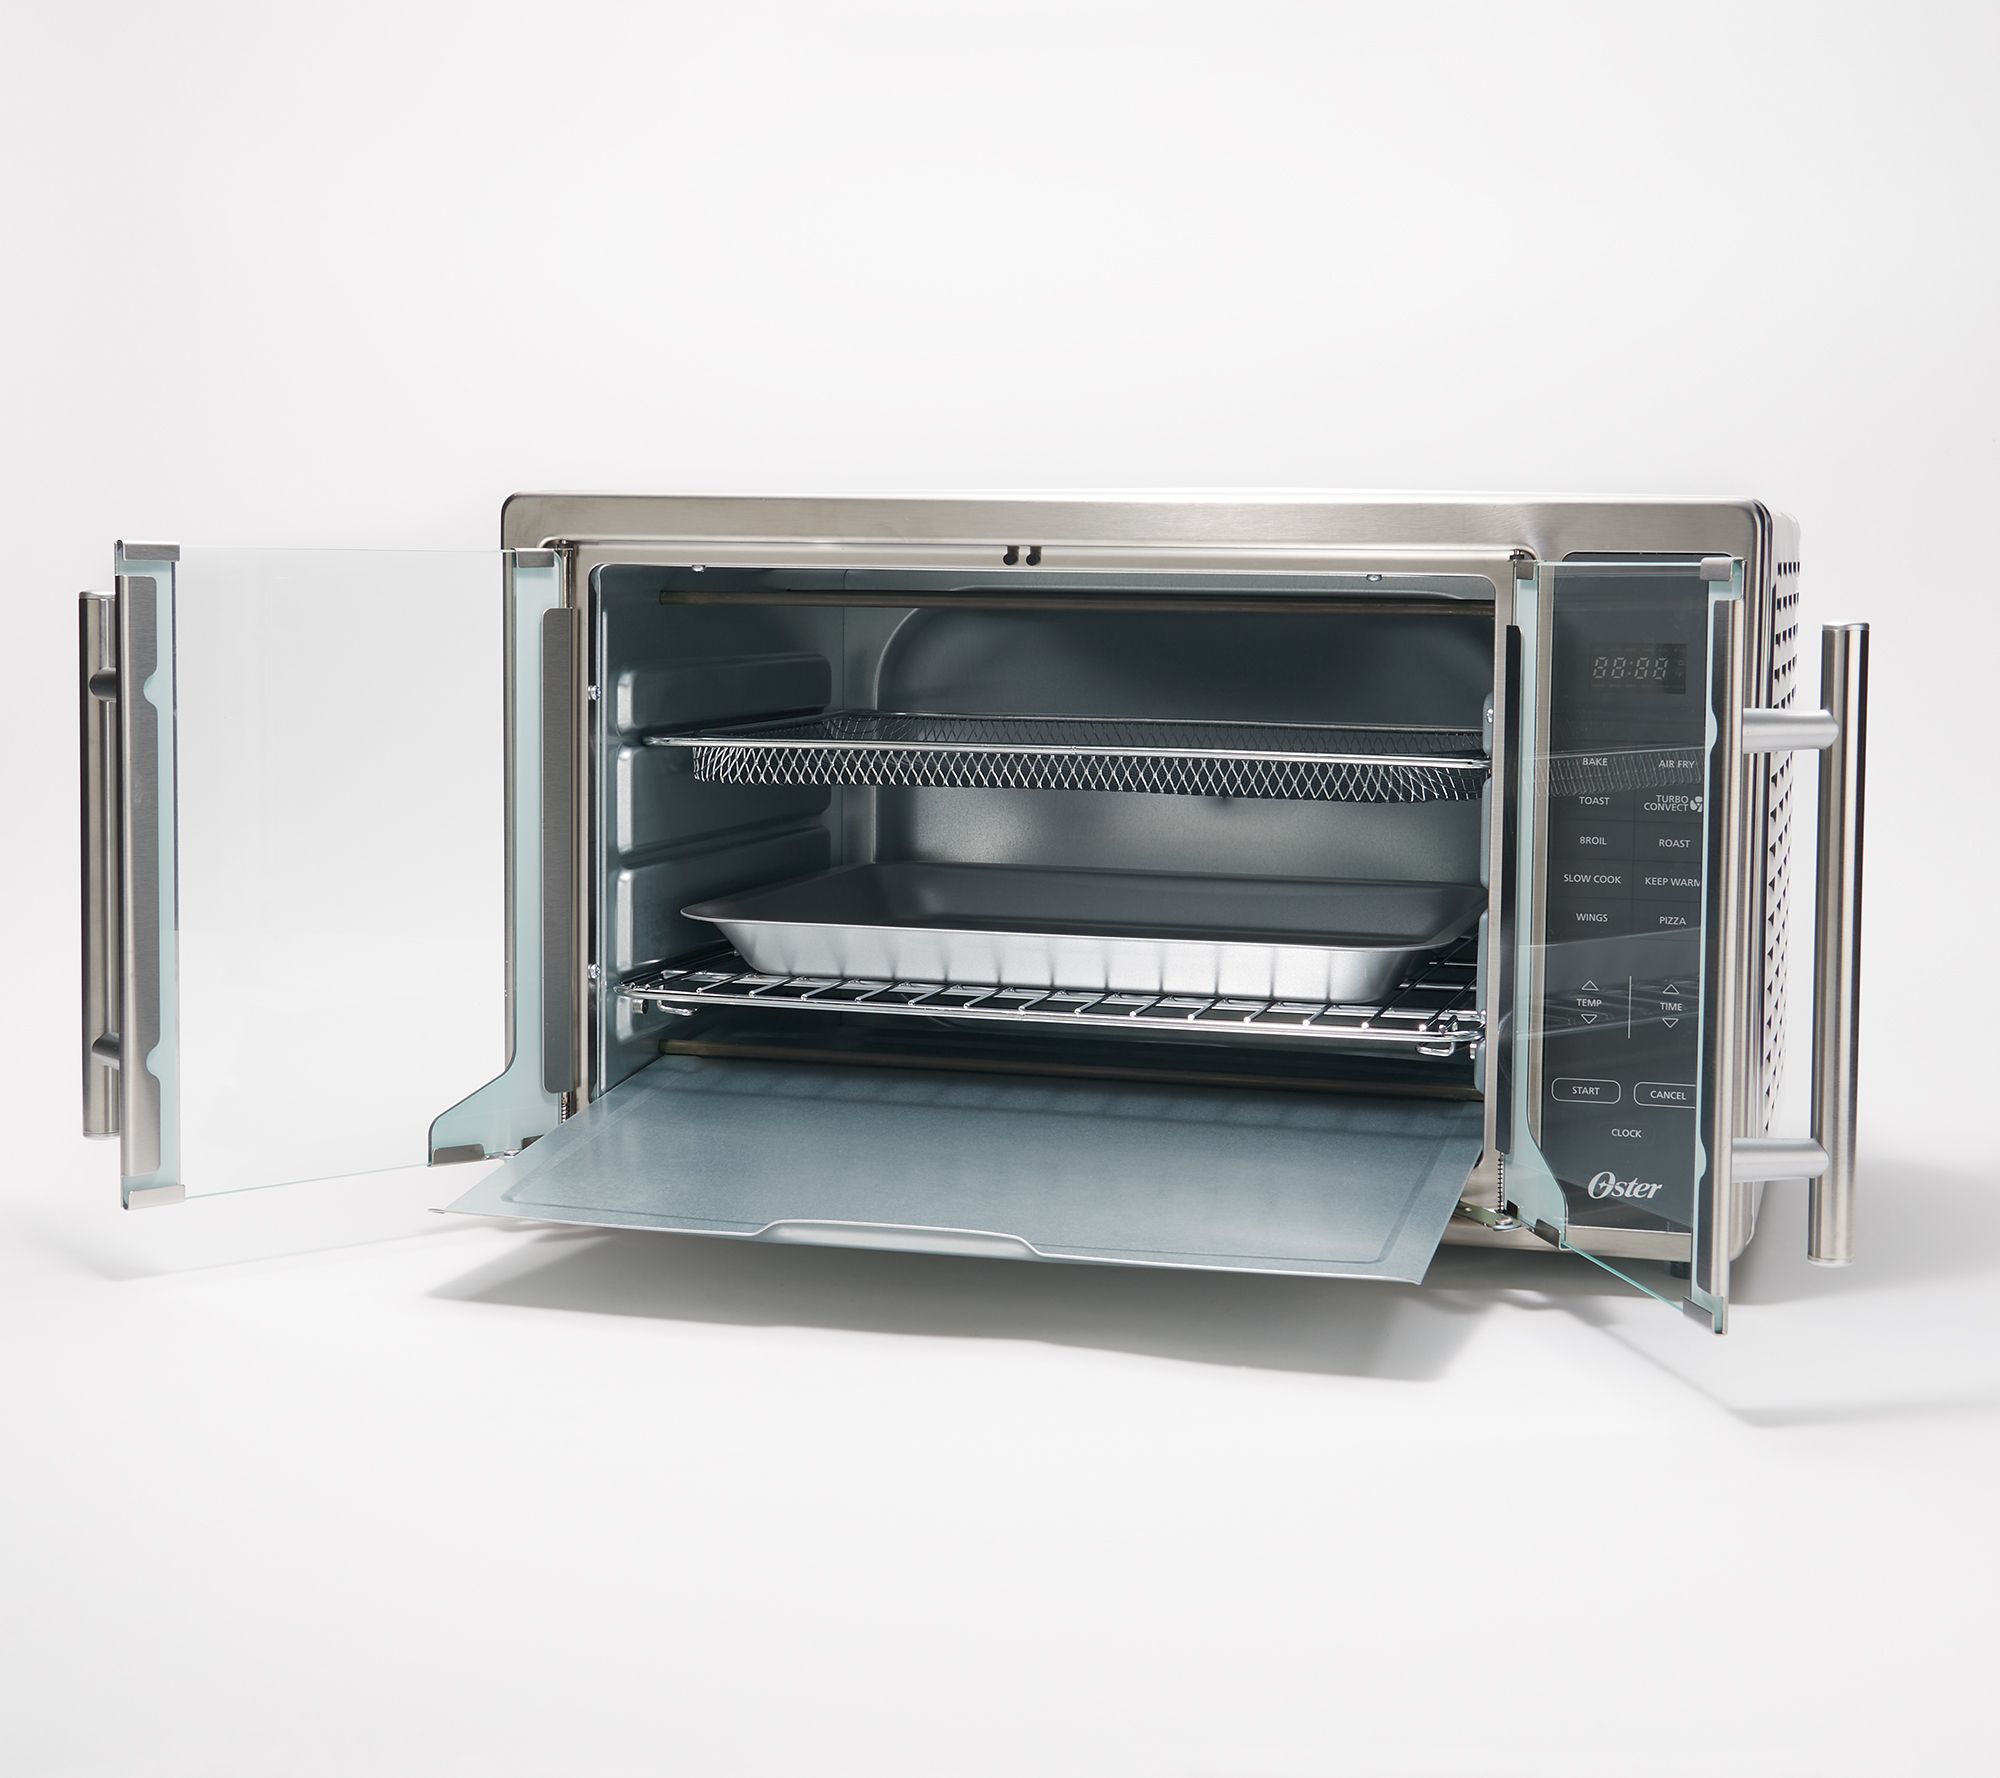 Oster French-Door Air-Fry Convection Countertop Oven - NW Asset Services